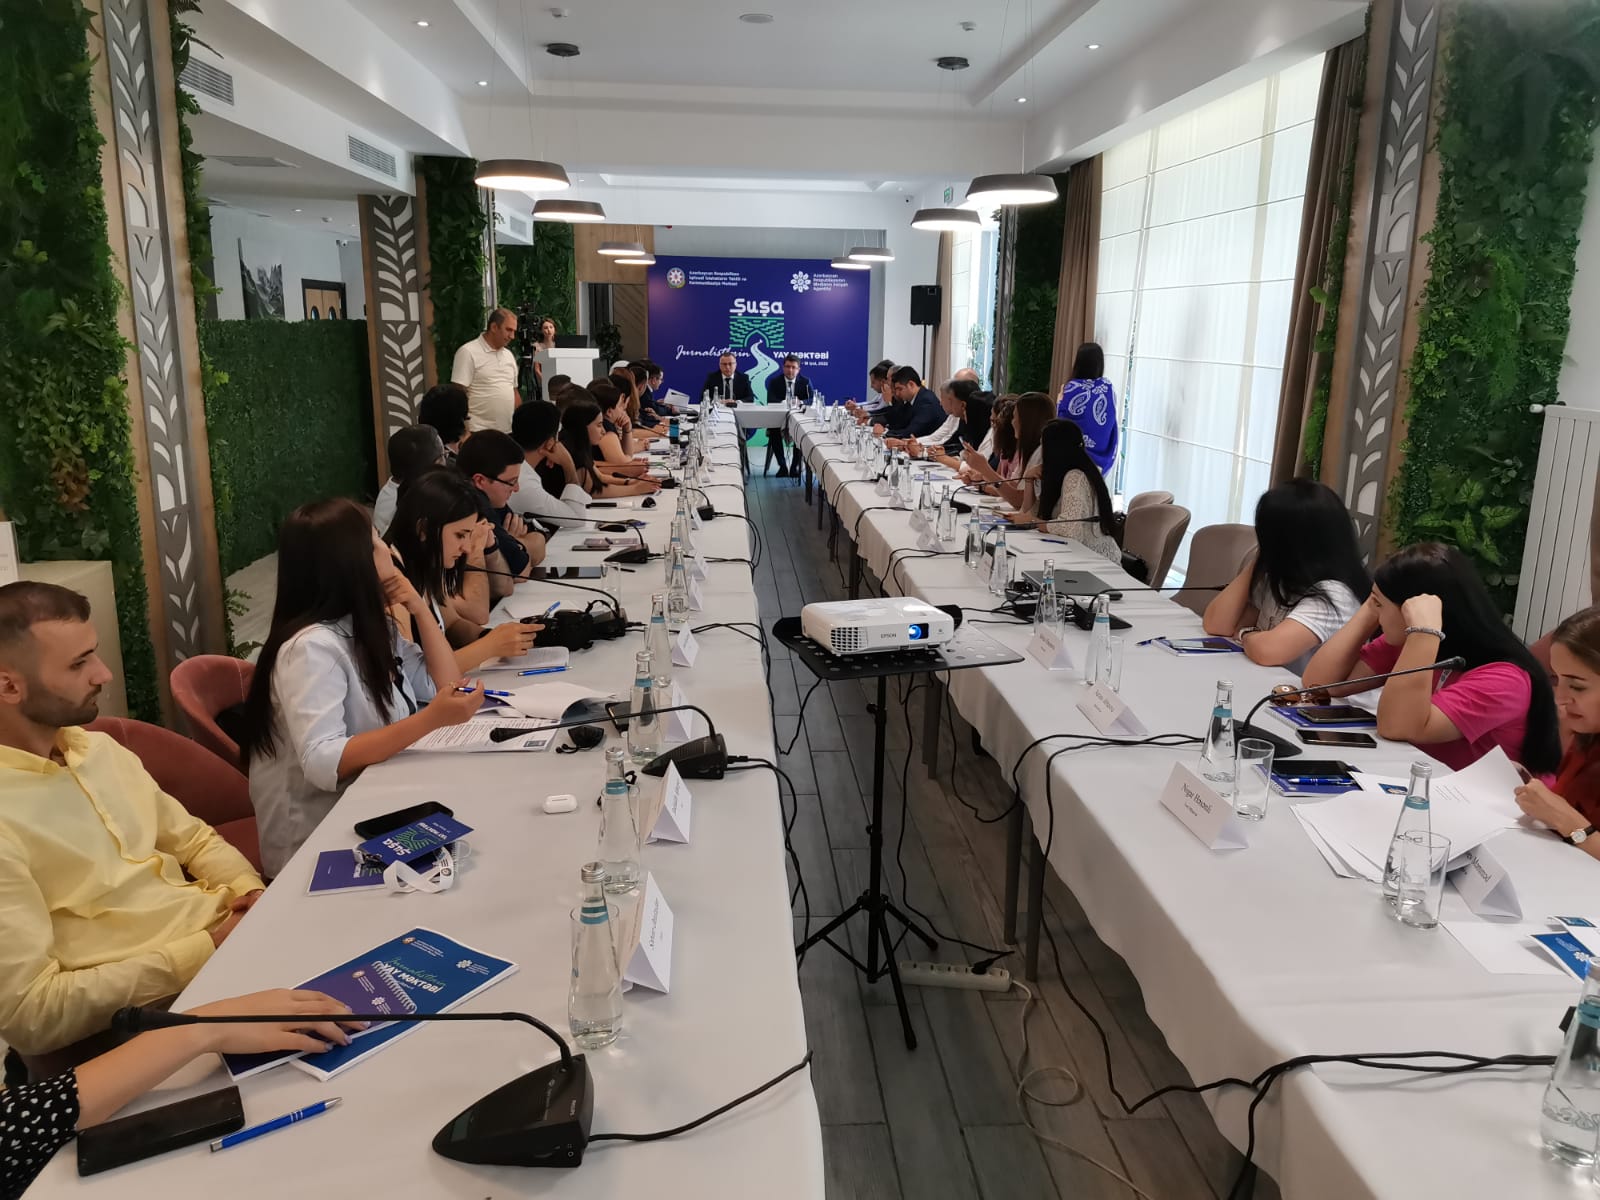 The Center for Analysis of Economic Reforms and Communication and the Media Development Agency of Azerbaijan are launching training for journalists